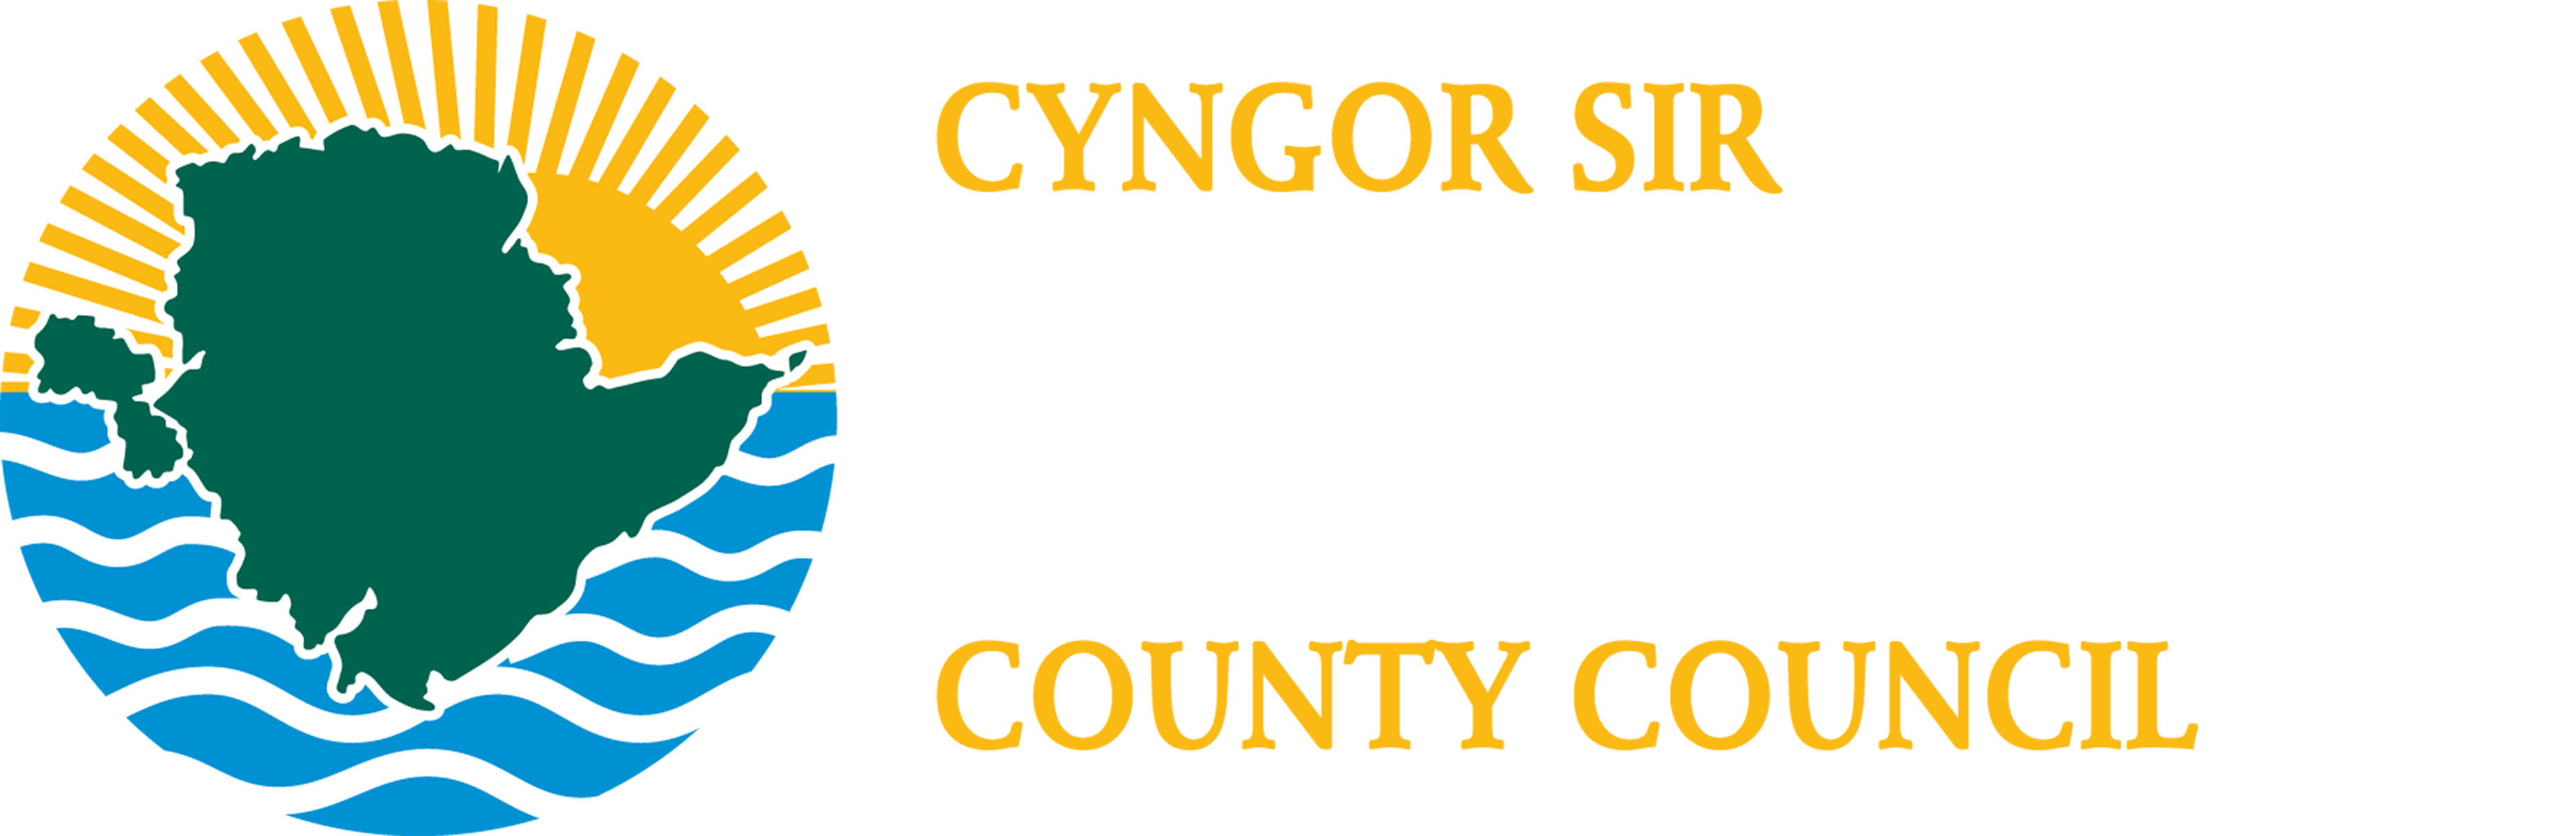 Teithio Llesol Ynys Môn 2 / Anglesey Active Travel 2 logo